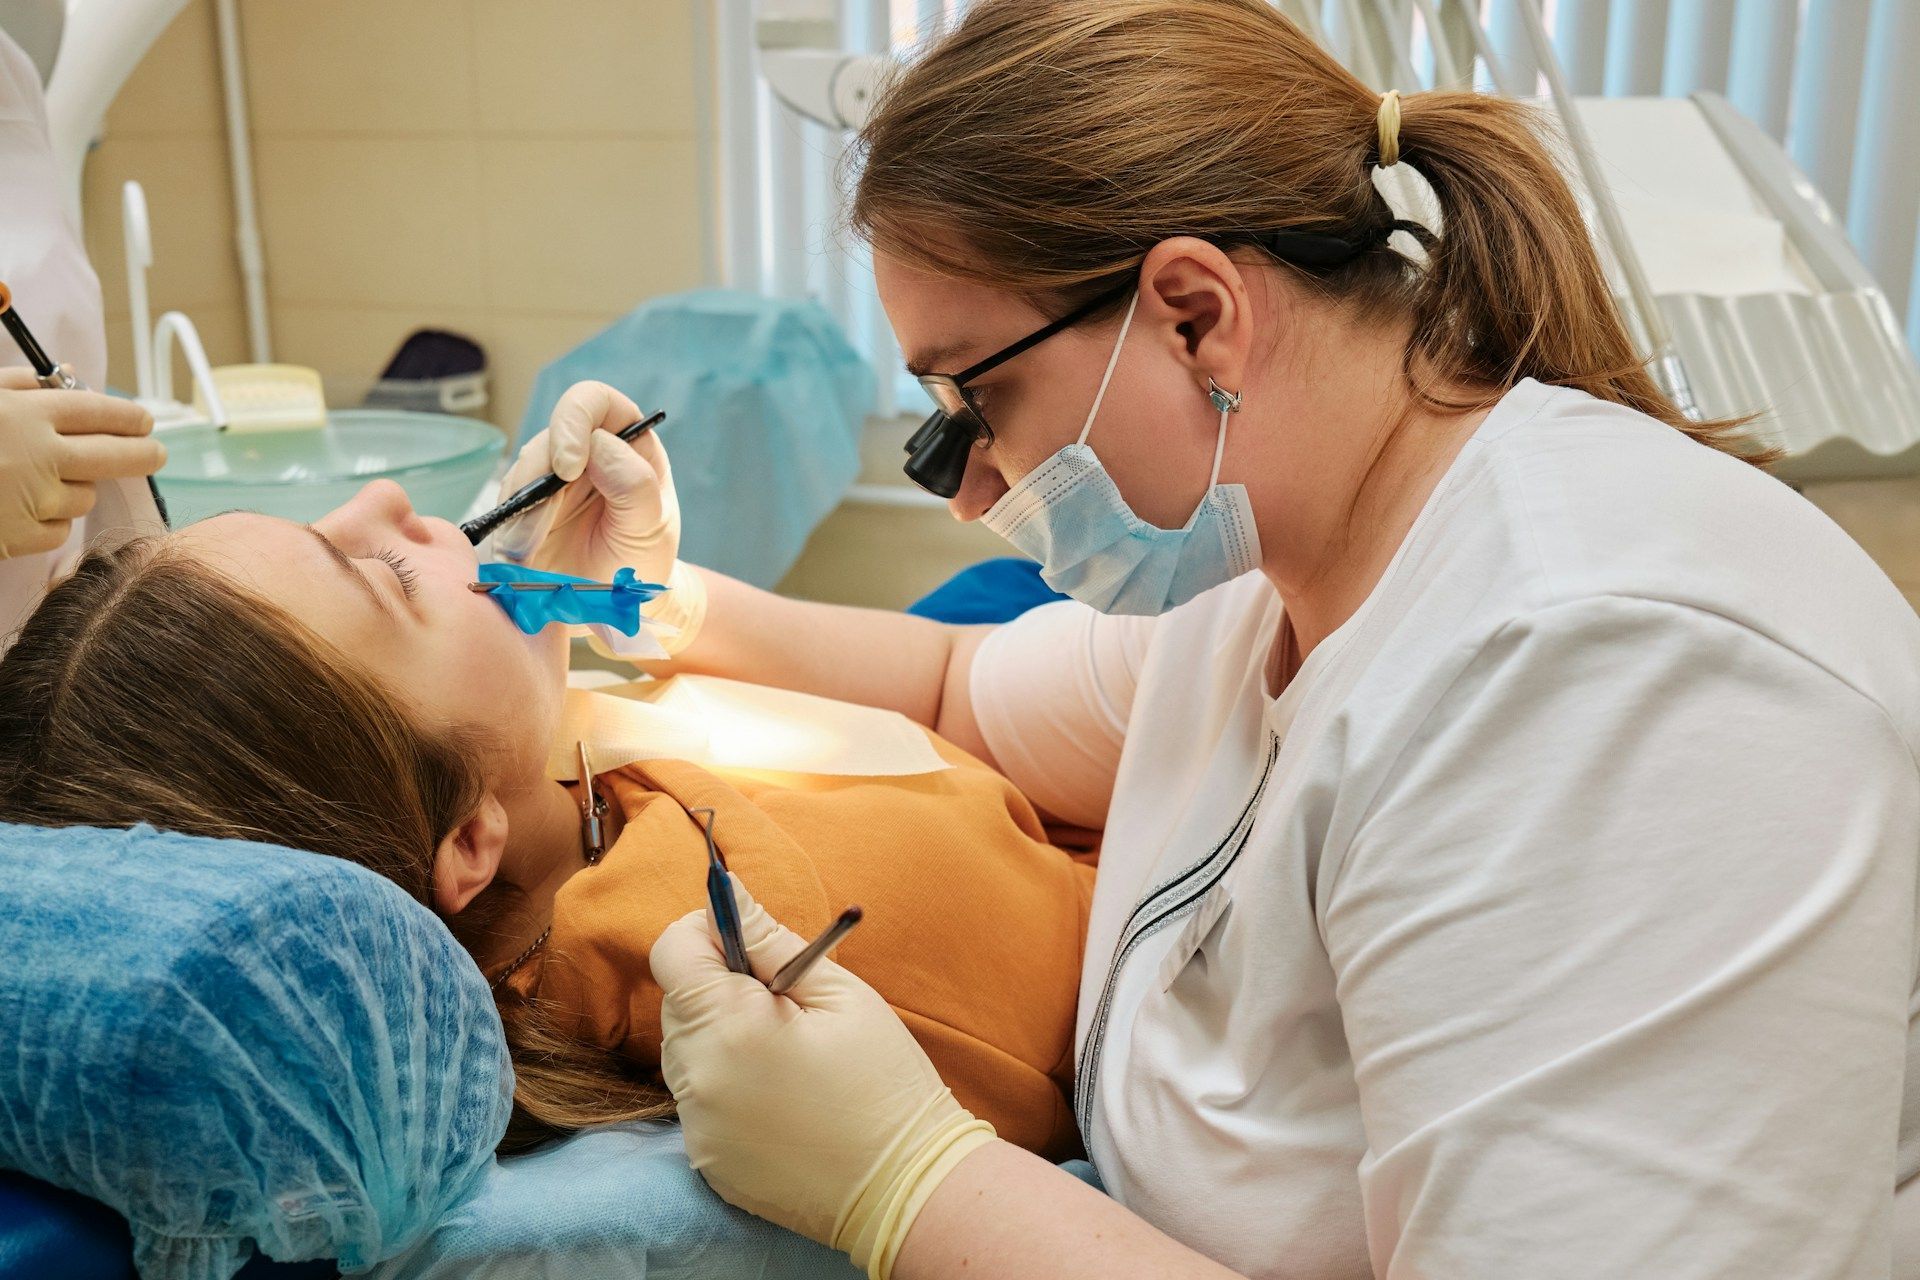 A dentist is examining a patient's teeth in a dental office.